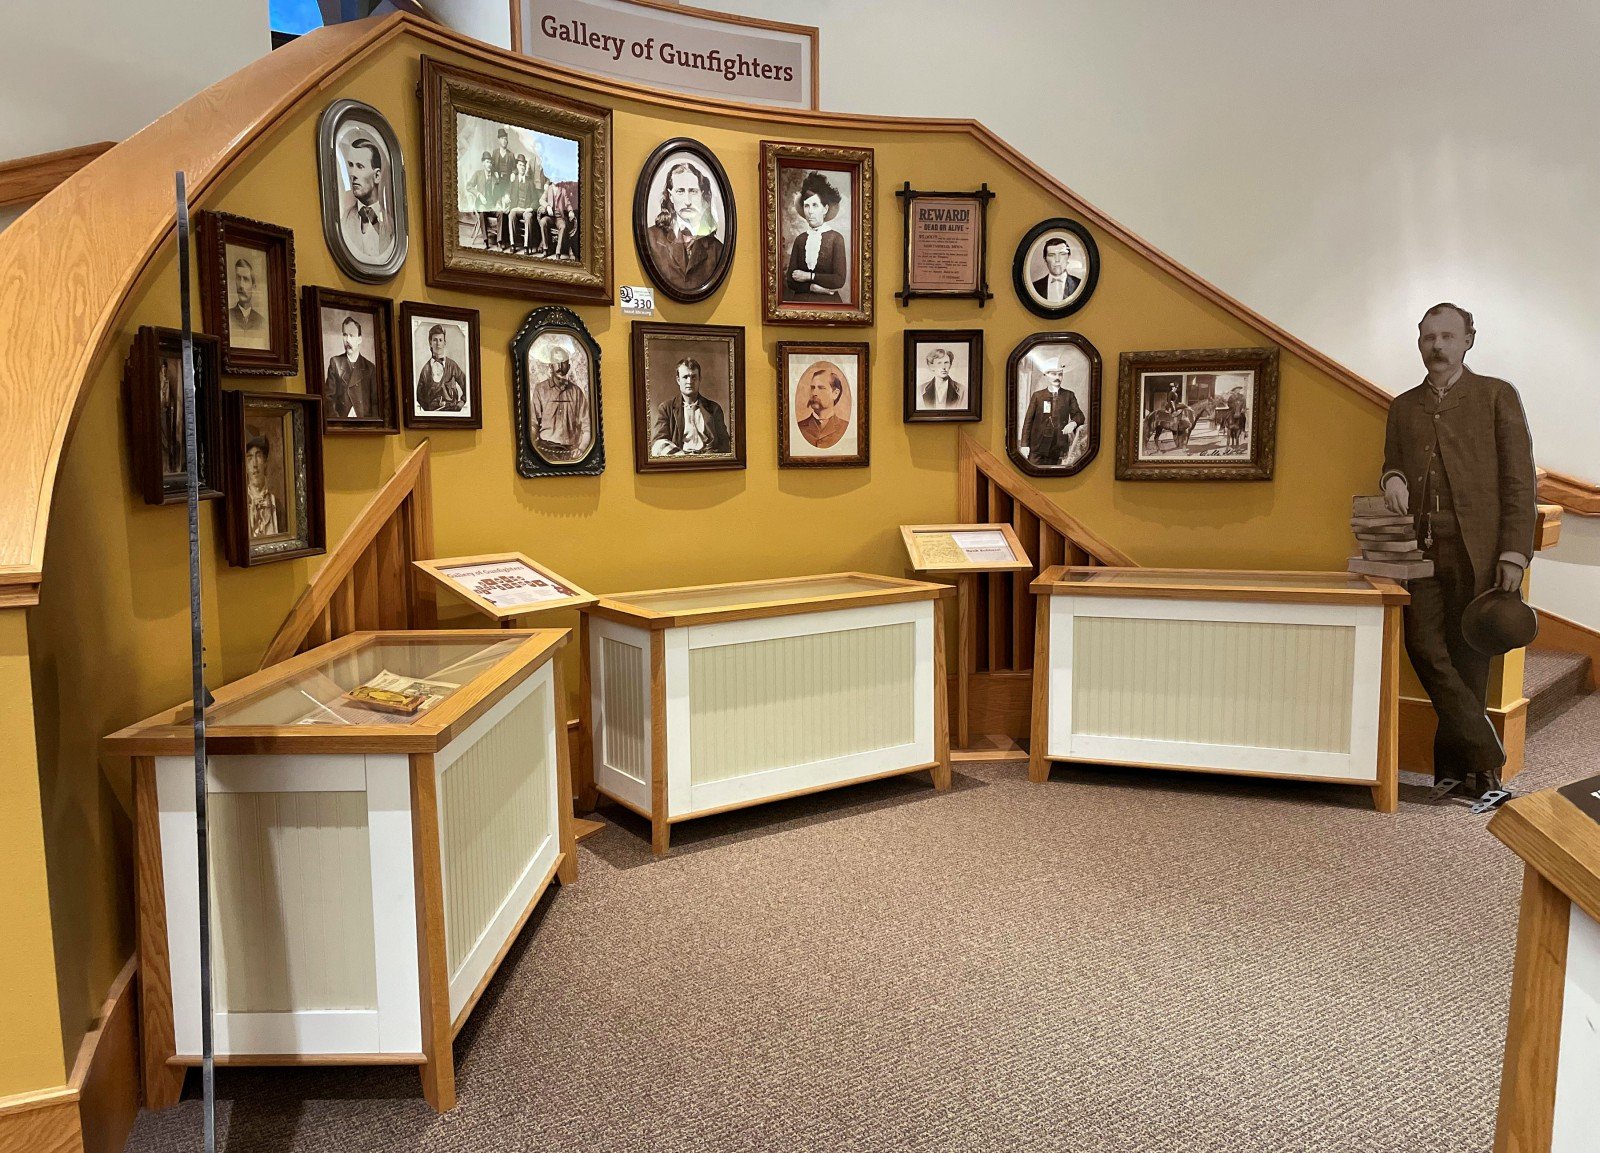 Gallery of Gunfighters, McCracken Research Library, the Buffalo Bill Center of the Wet, Cody, Wyoming, USA. (BBCW-MRL02)